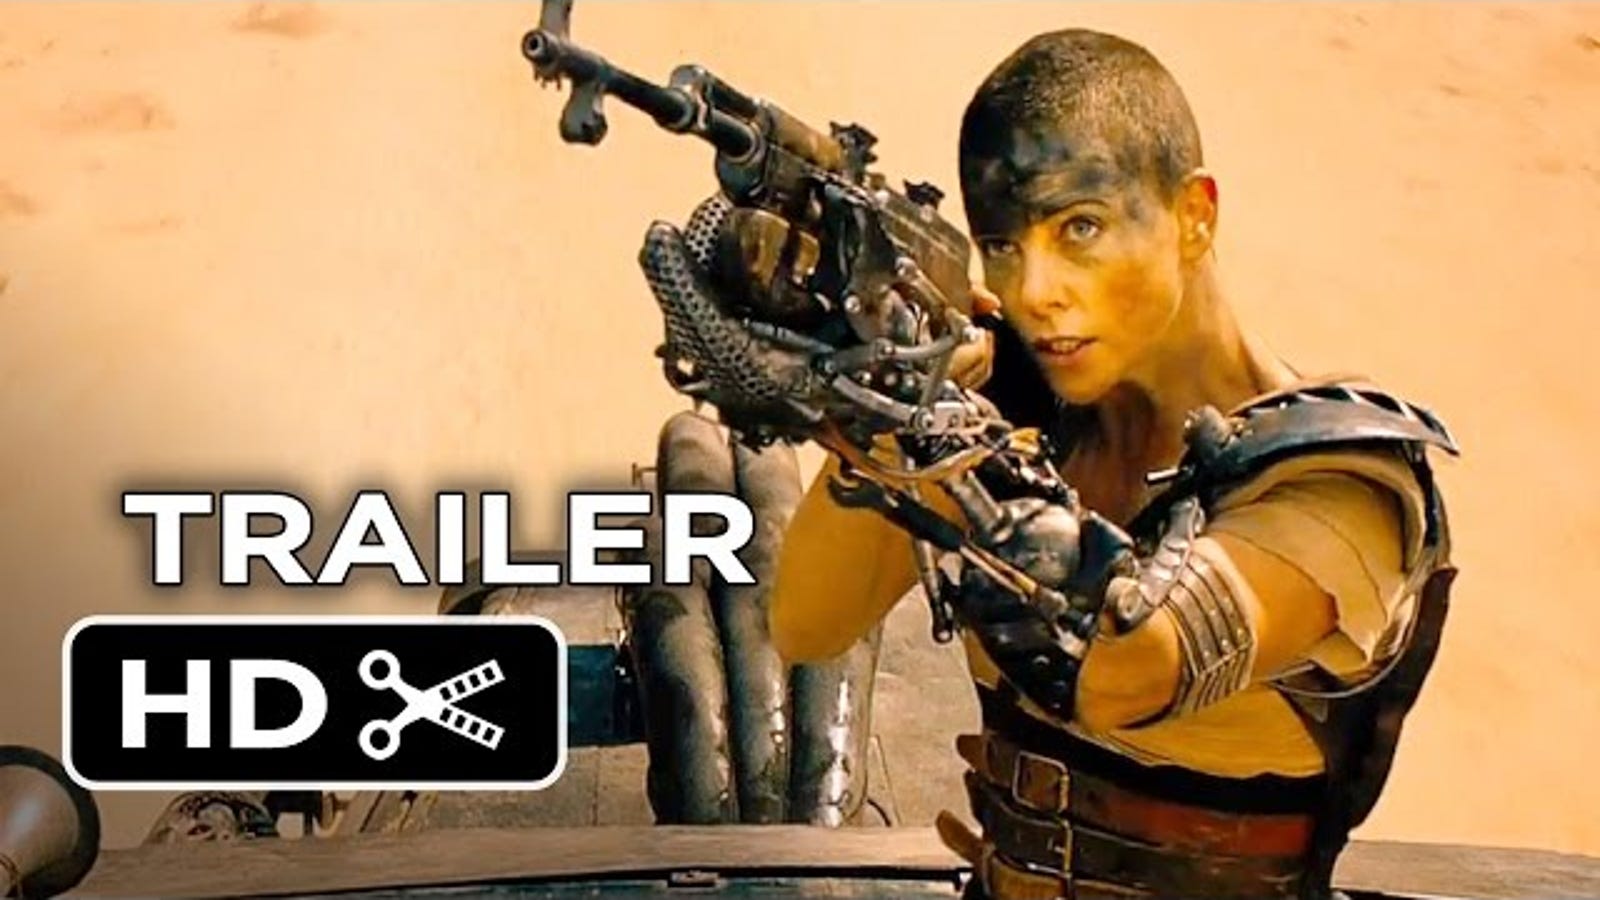 Here's The Final Mad Max Trailer -- So What's Tom Hardy Doing?